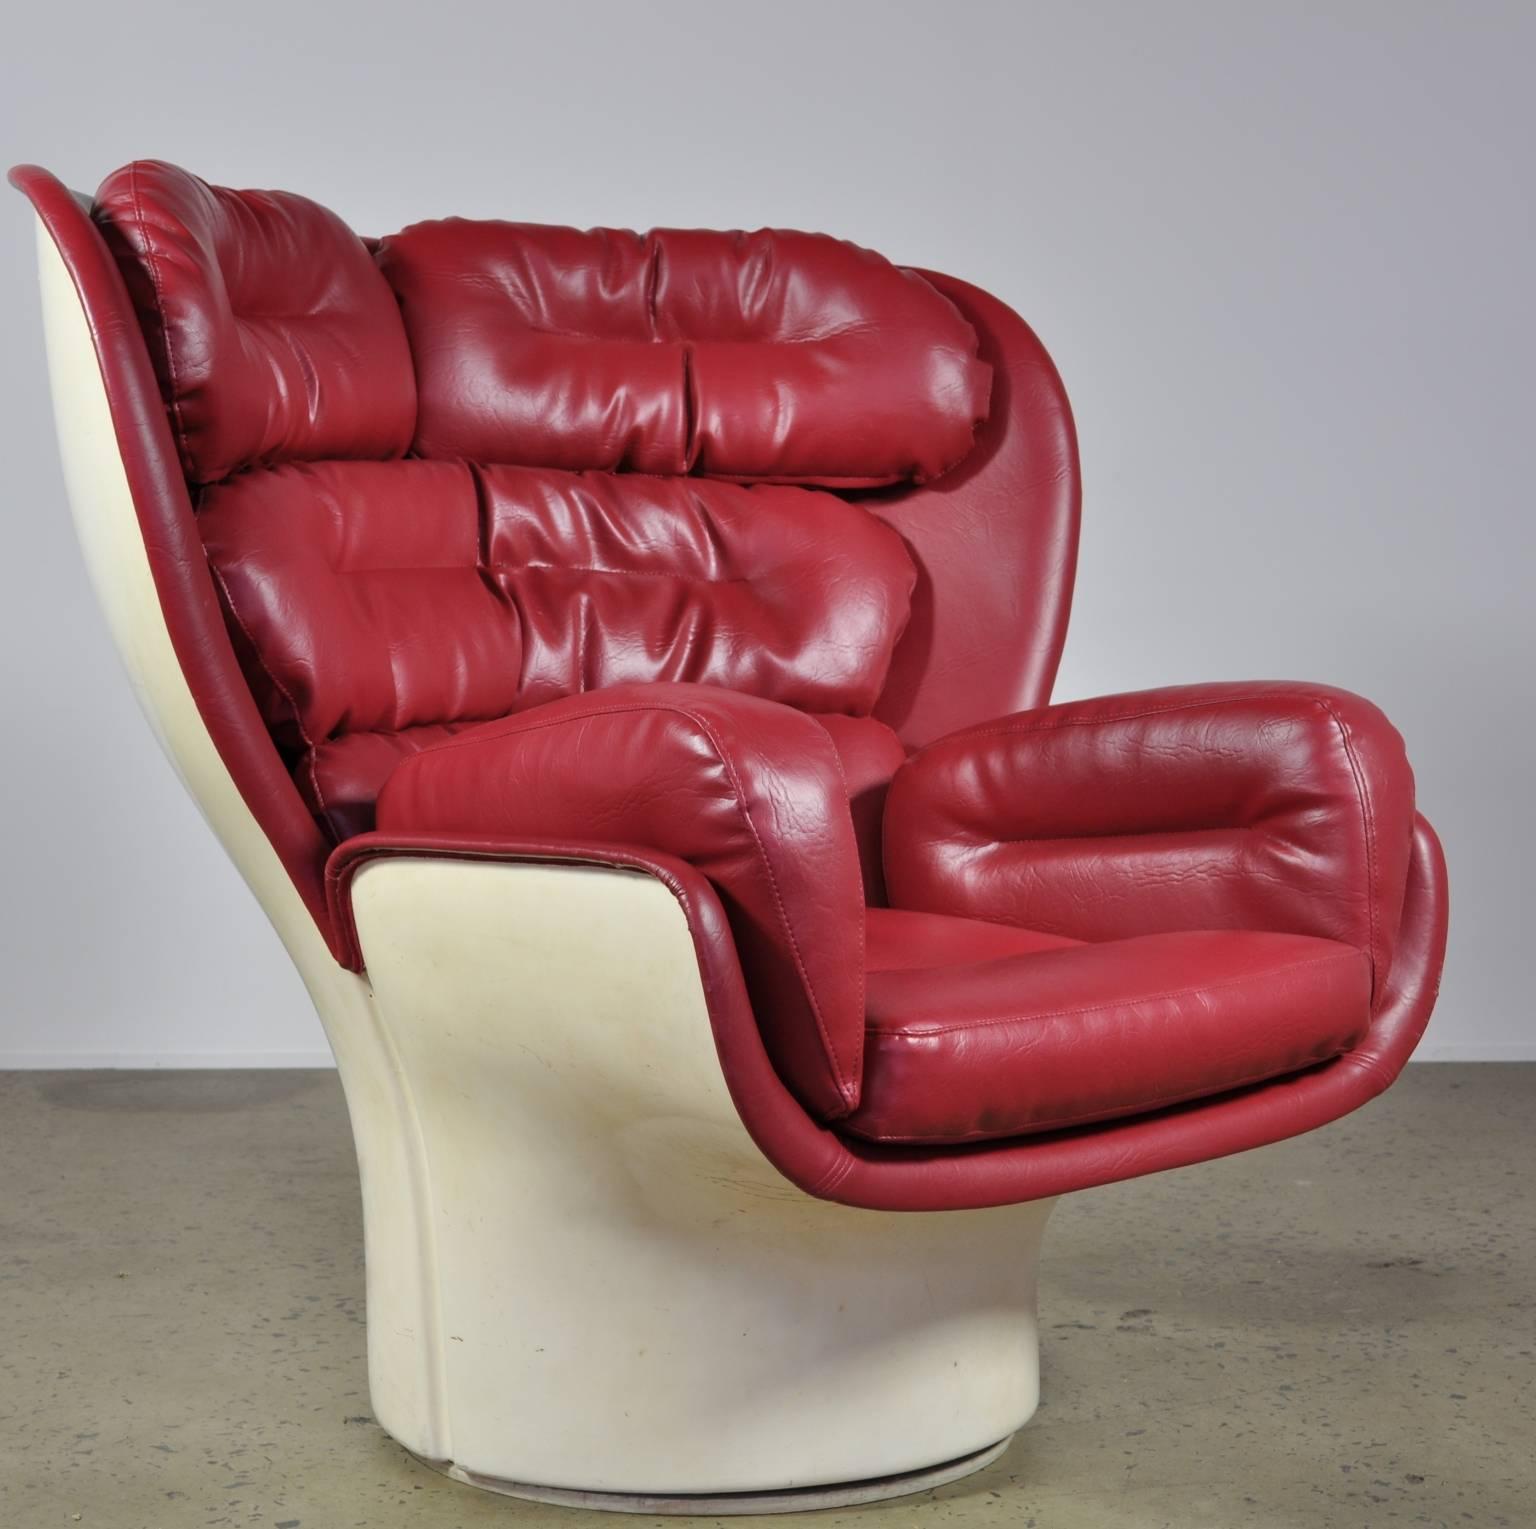 The Classic futuristic Elda chair by Joe Colombo.
Considered the first armchair made of moulded plastic shell (reinforced with fiberglass), the Elda chair was designed by Joe Colombo in the 1960s and manufactured by Comfort Italy.
Colombo was